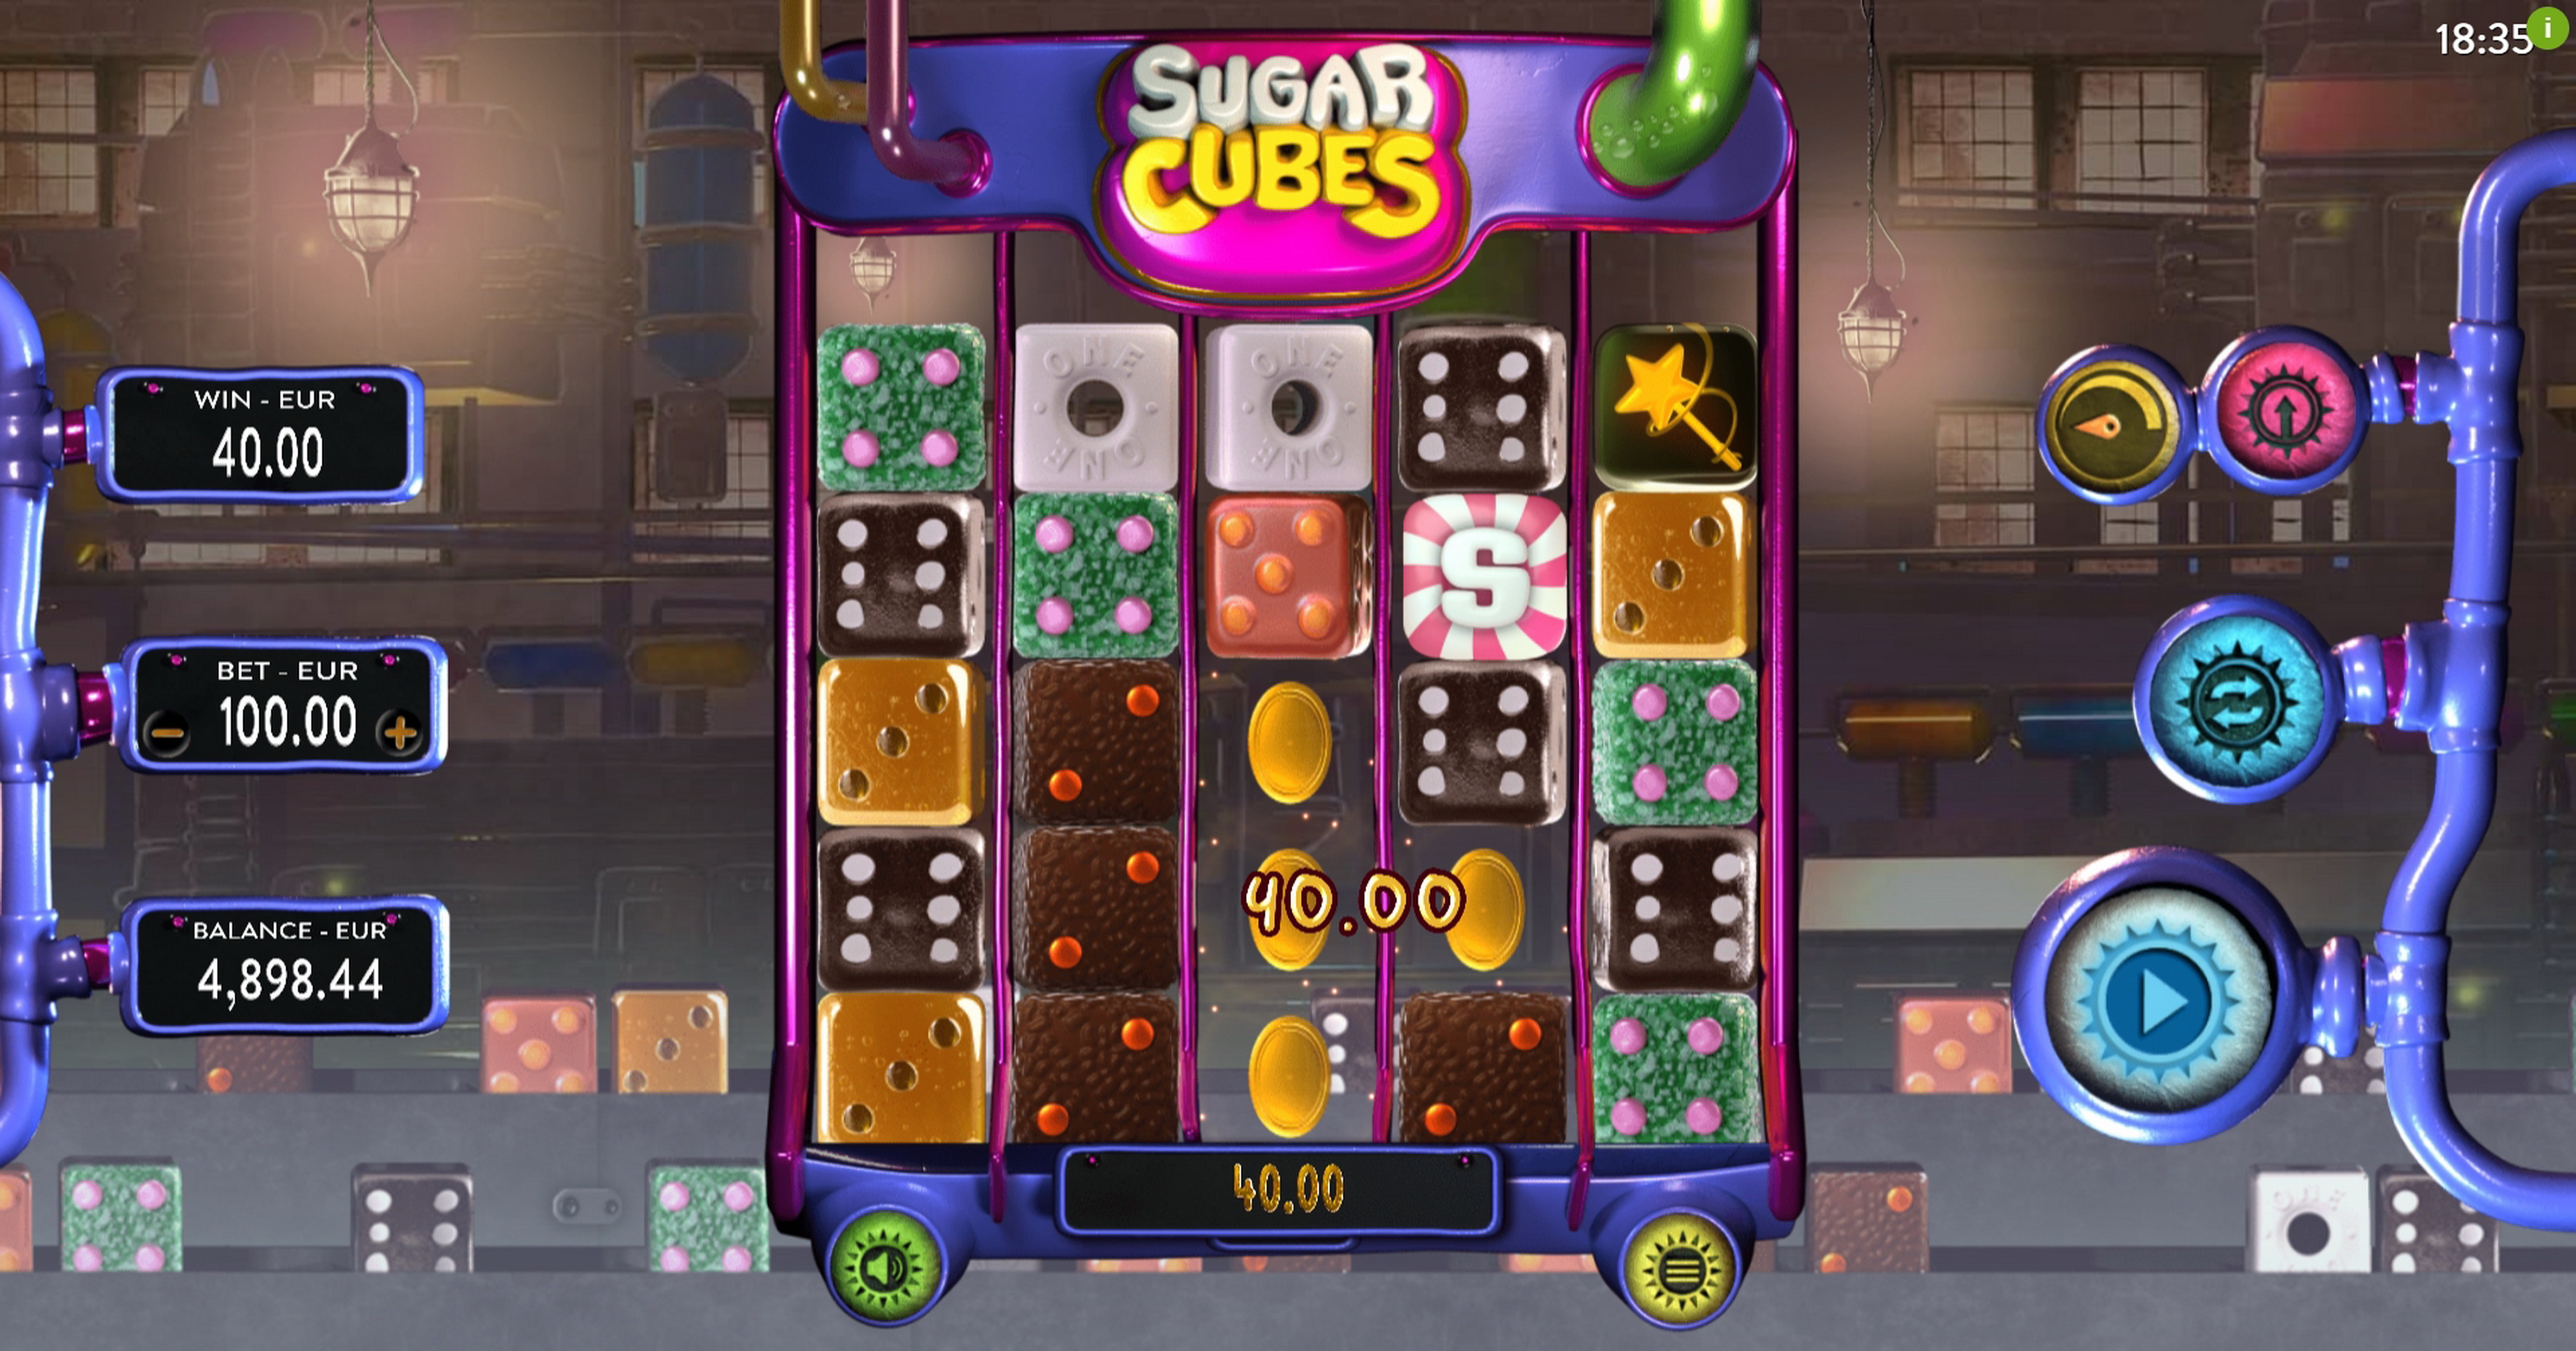 Win Money in Sugar Cubes Free Slot Game by DiceLab